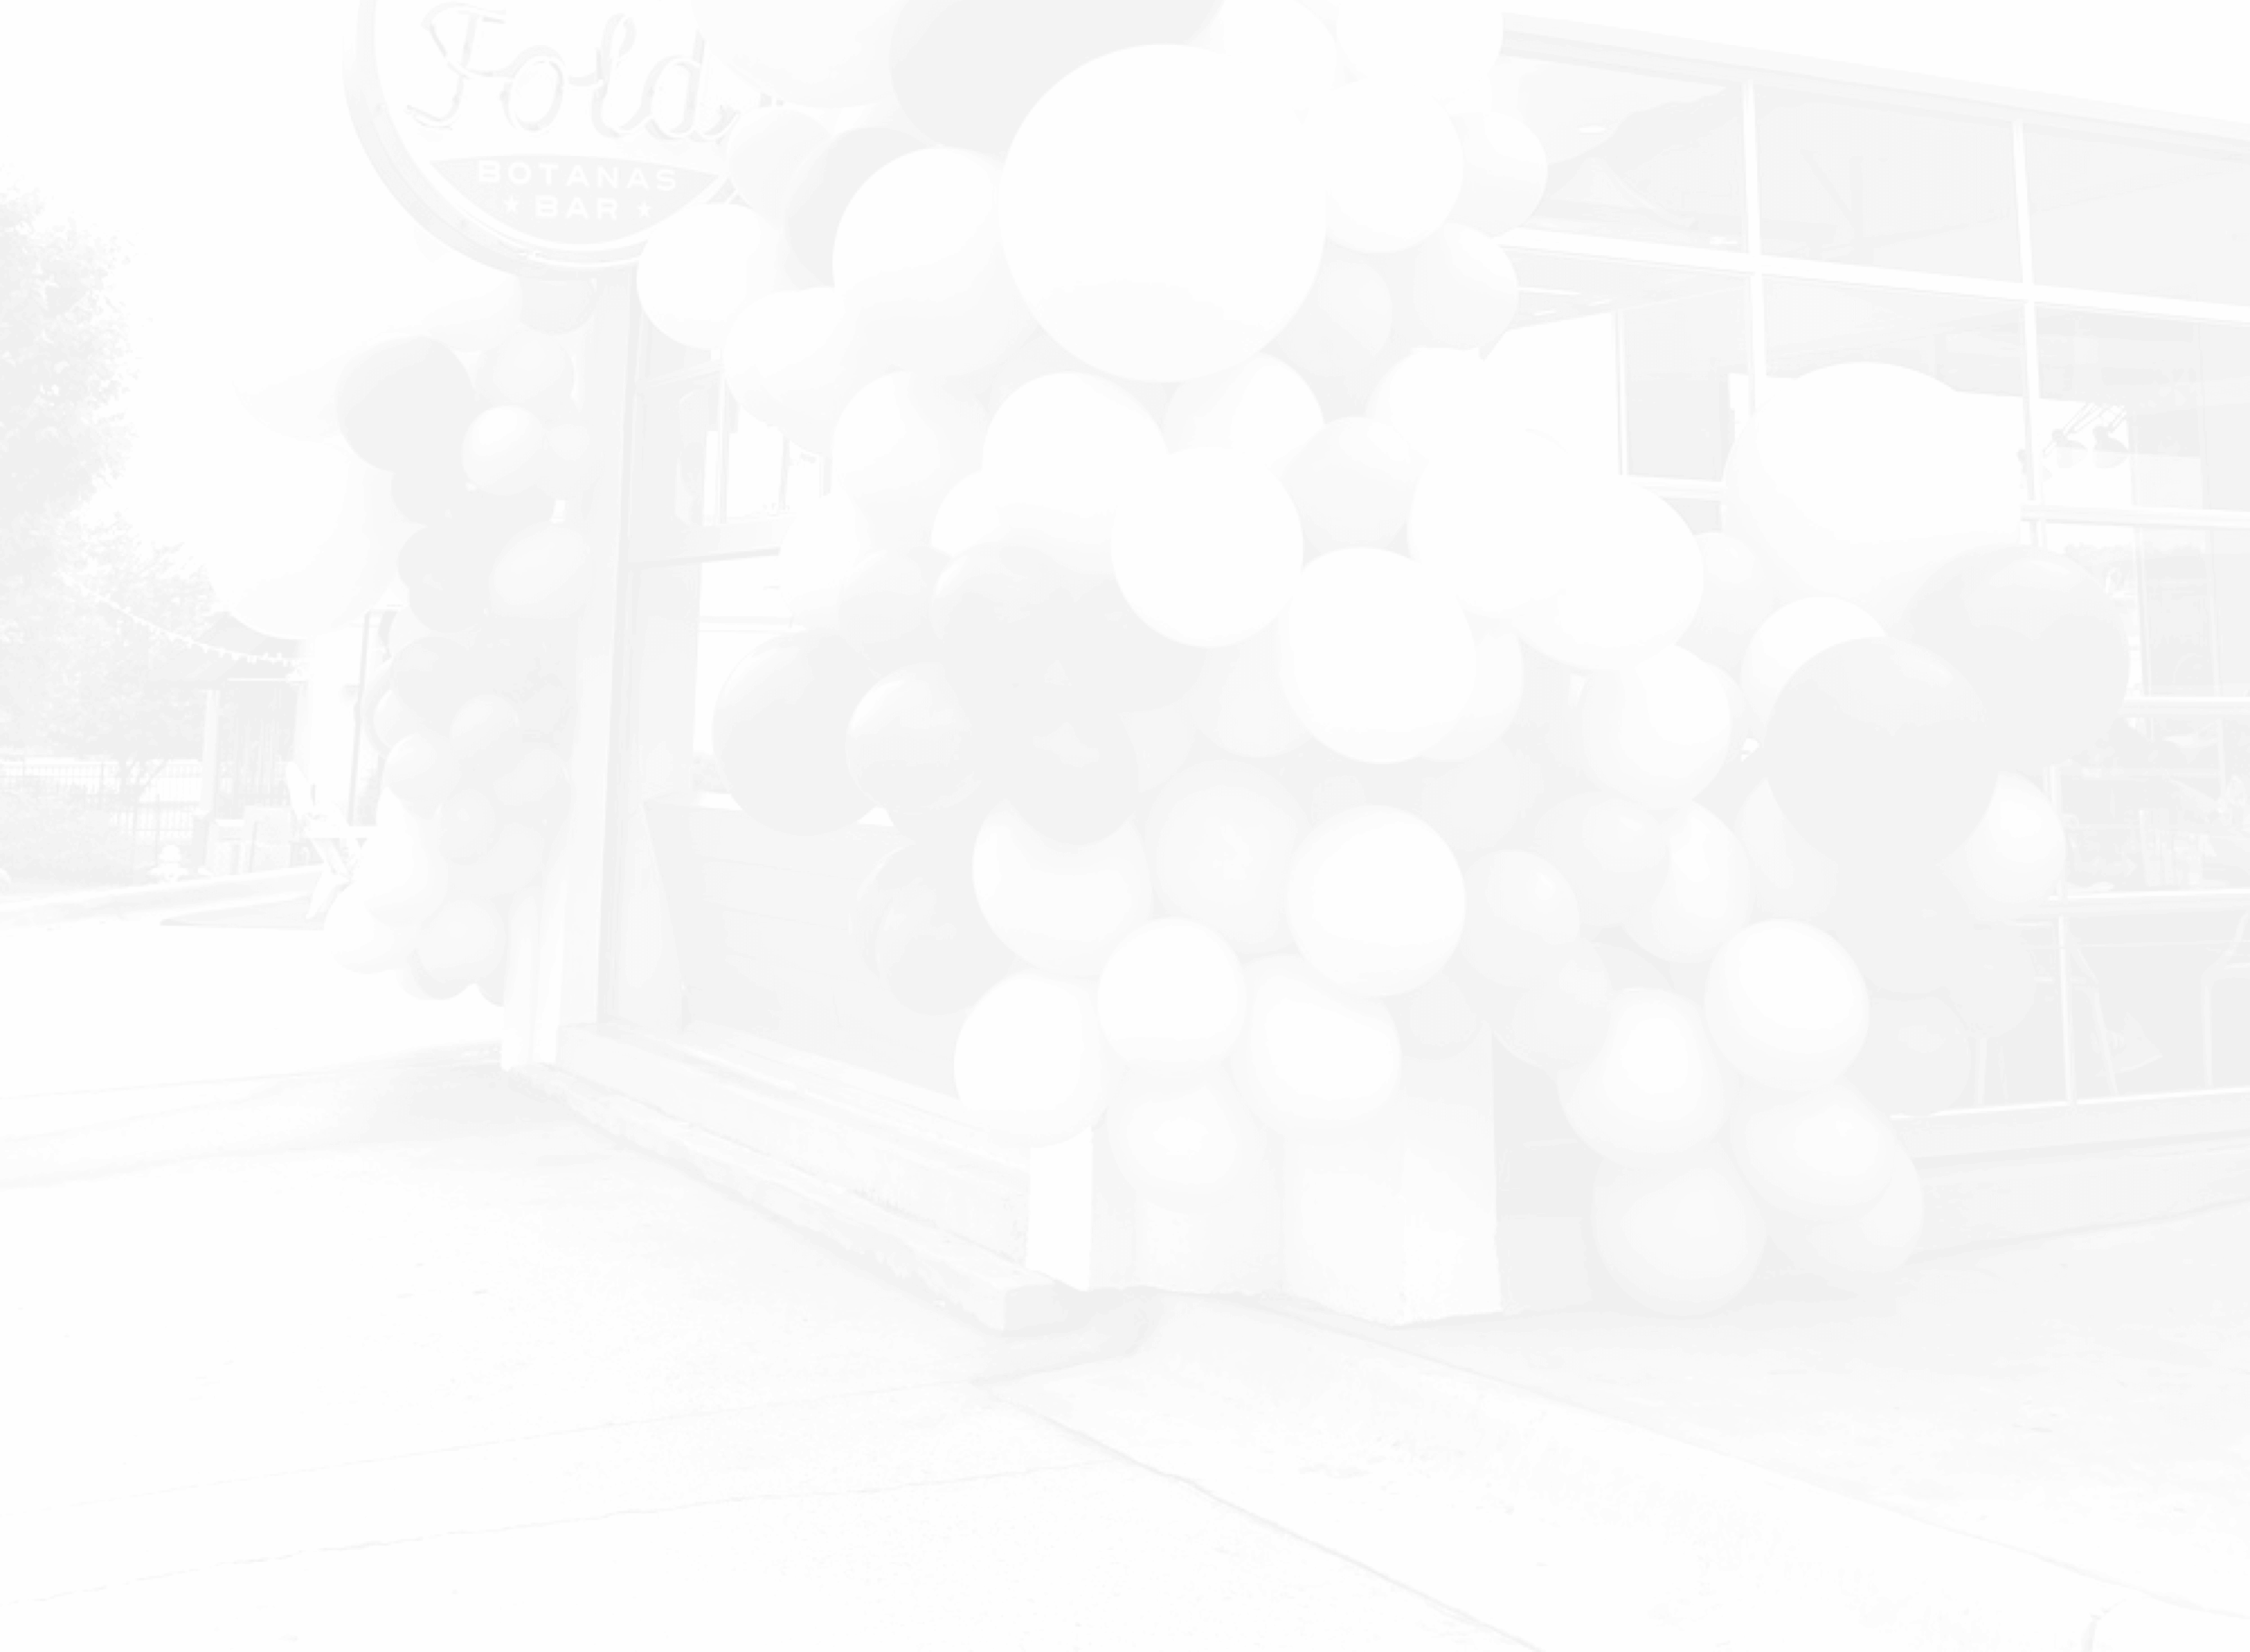 Background image of The Fold restaurant in Little Rock, Arkansas, featuring a Just Peachy balloon installation.